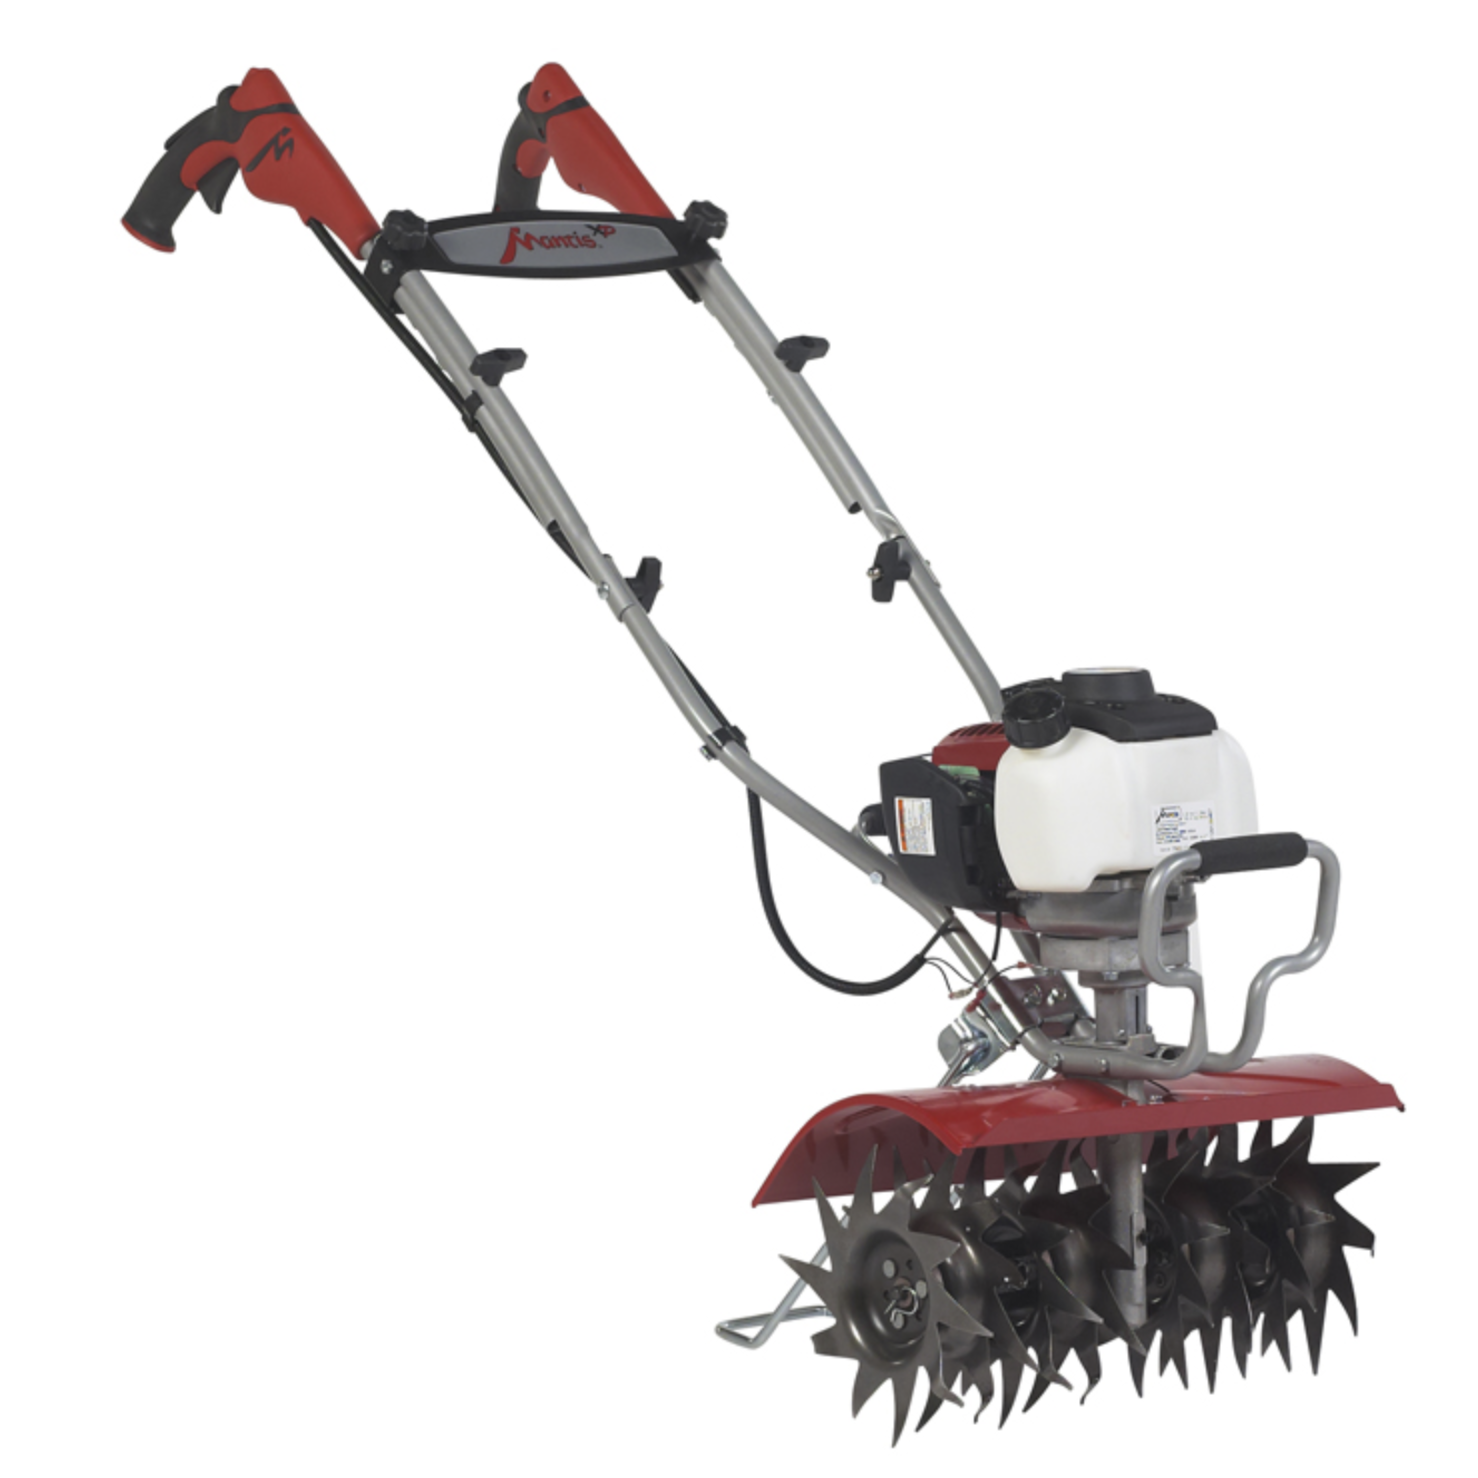 MANTIS XP Extra-Wide 4-Cycle Tiller/Cultivator 7566-12-02